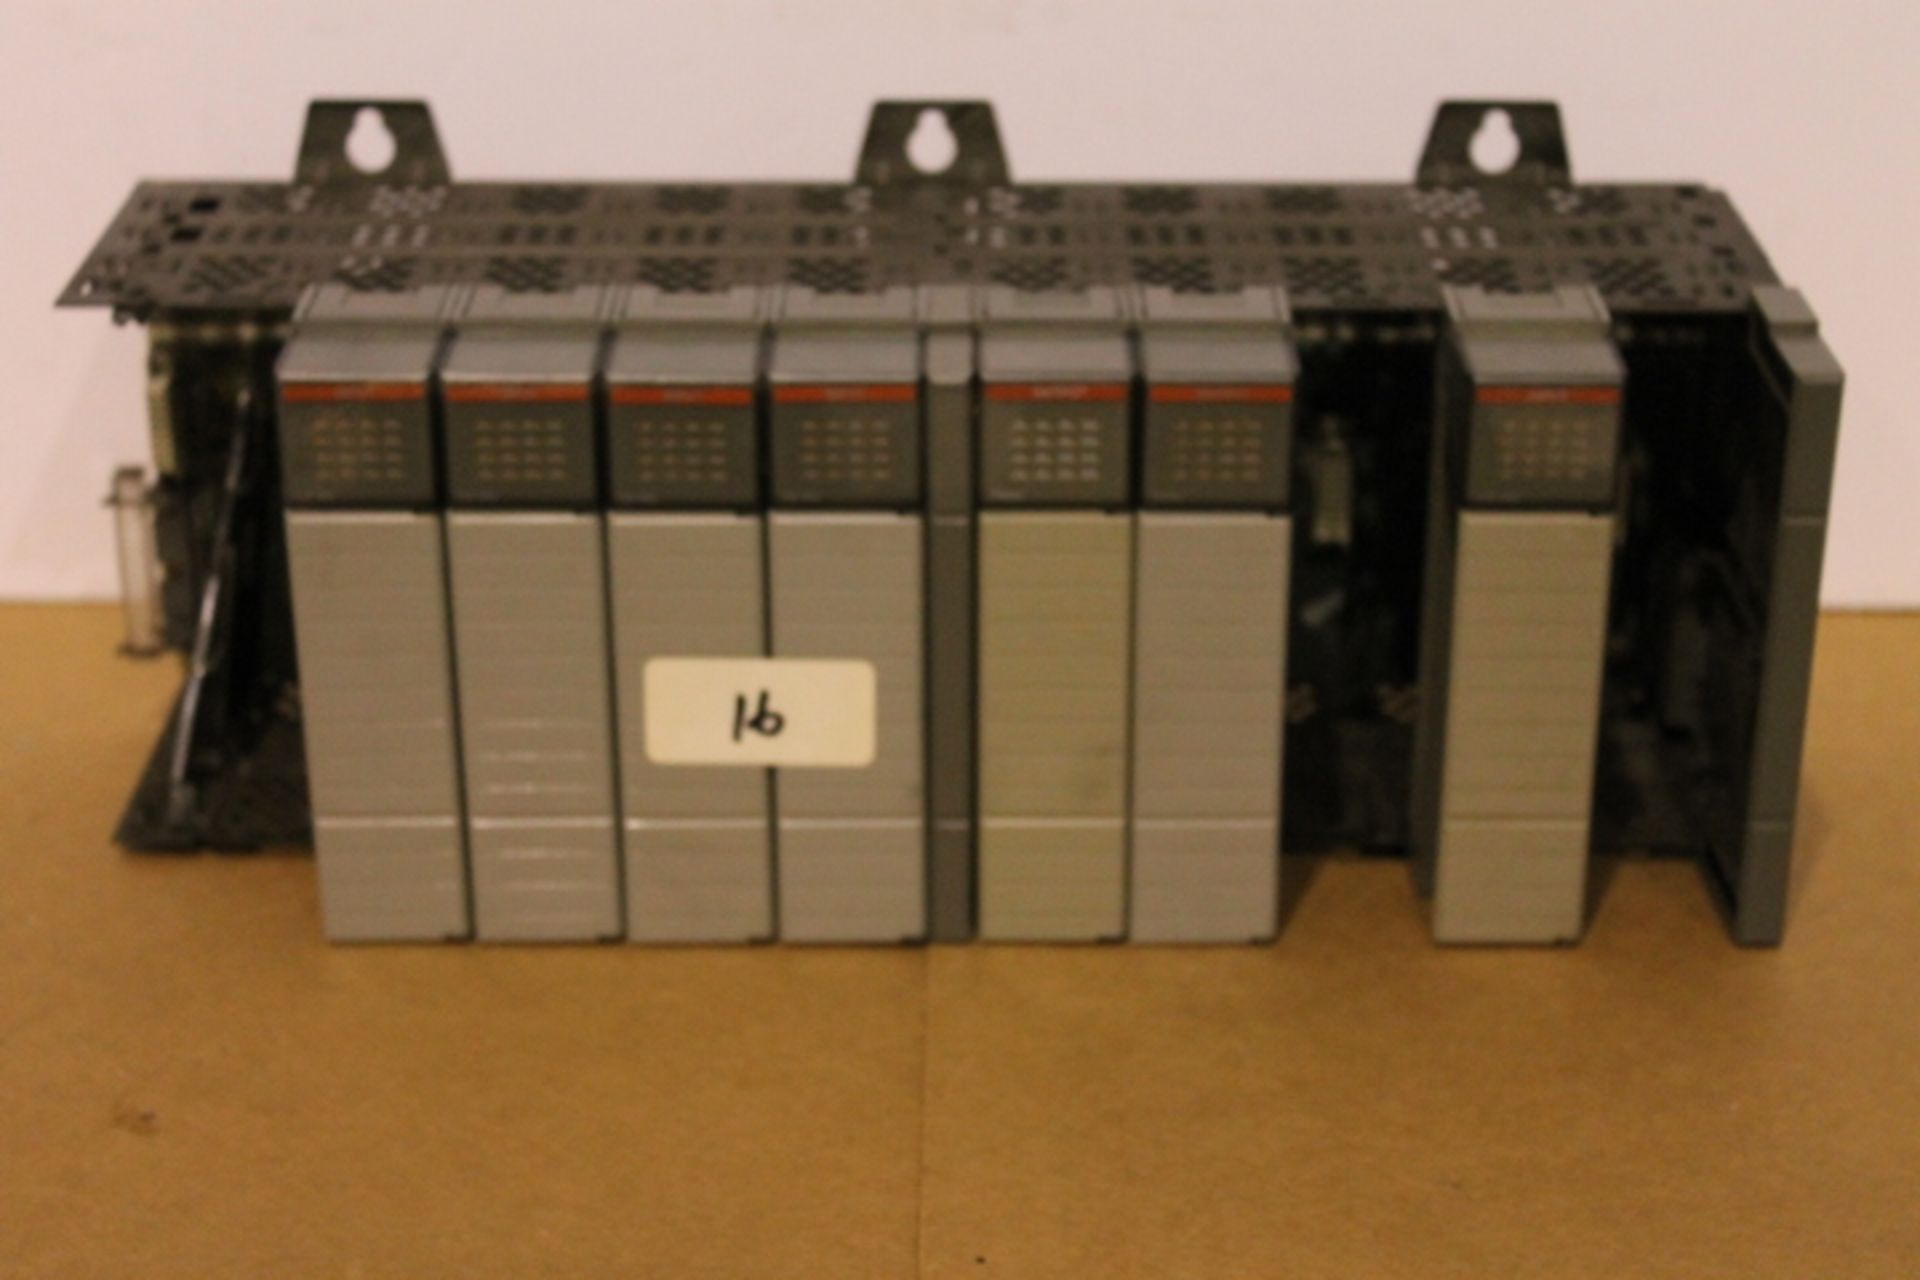 ALLEN-BRADLEY SLC 500 RACK W/ VARIOUS CARDS (SEE PICTURES)